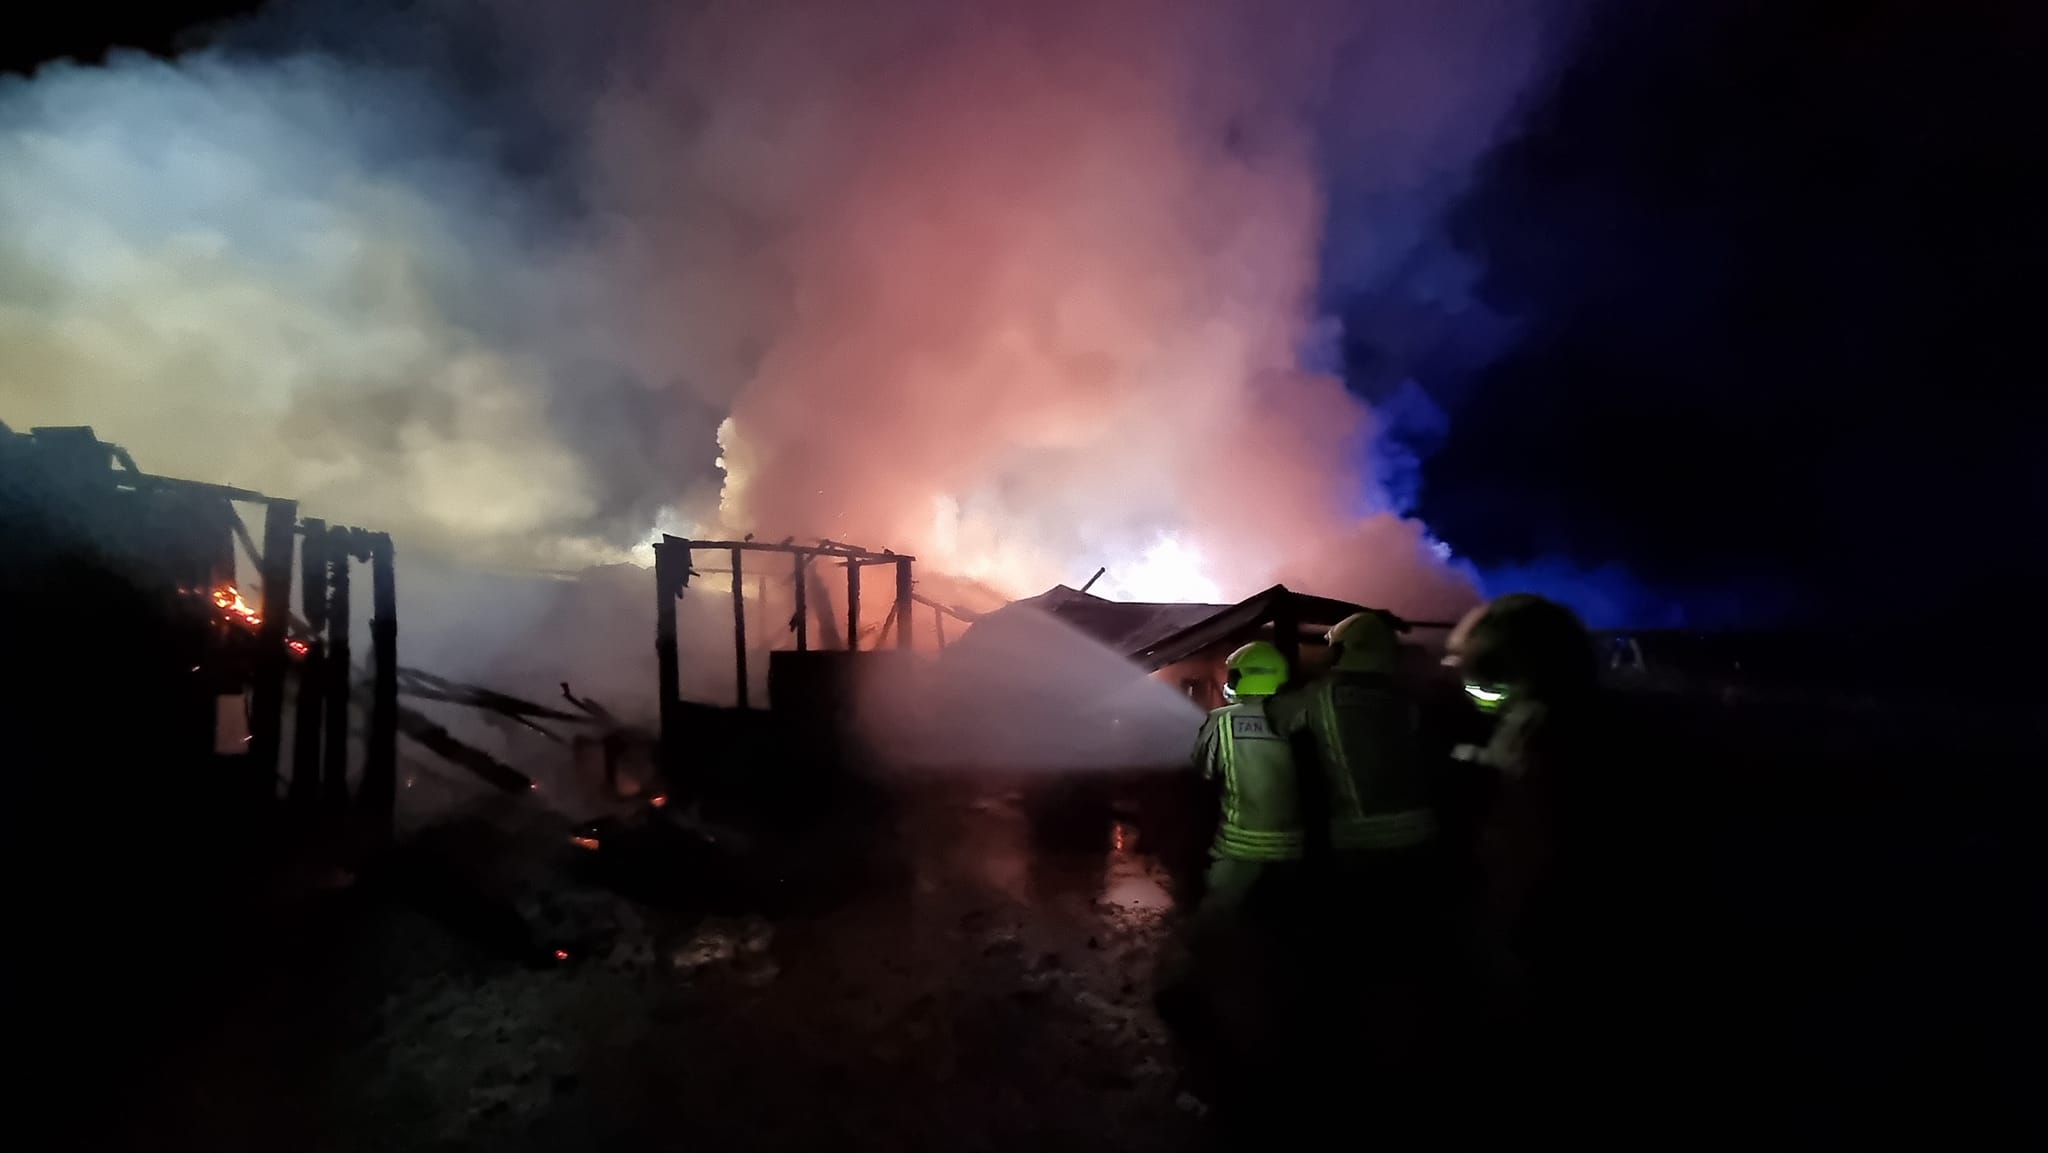 NEWS | Fire crews from across the county have worked through the night to control huge fire at a barn